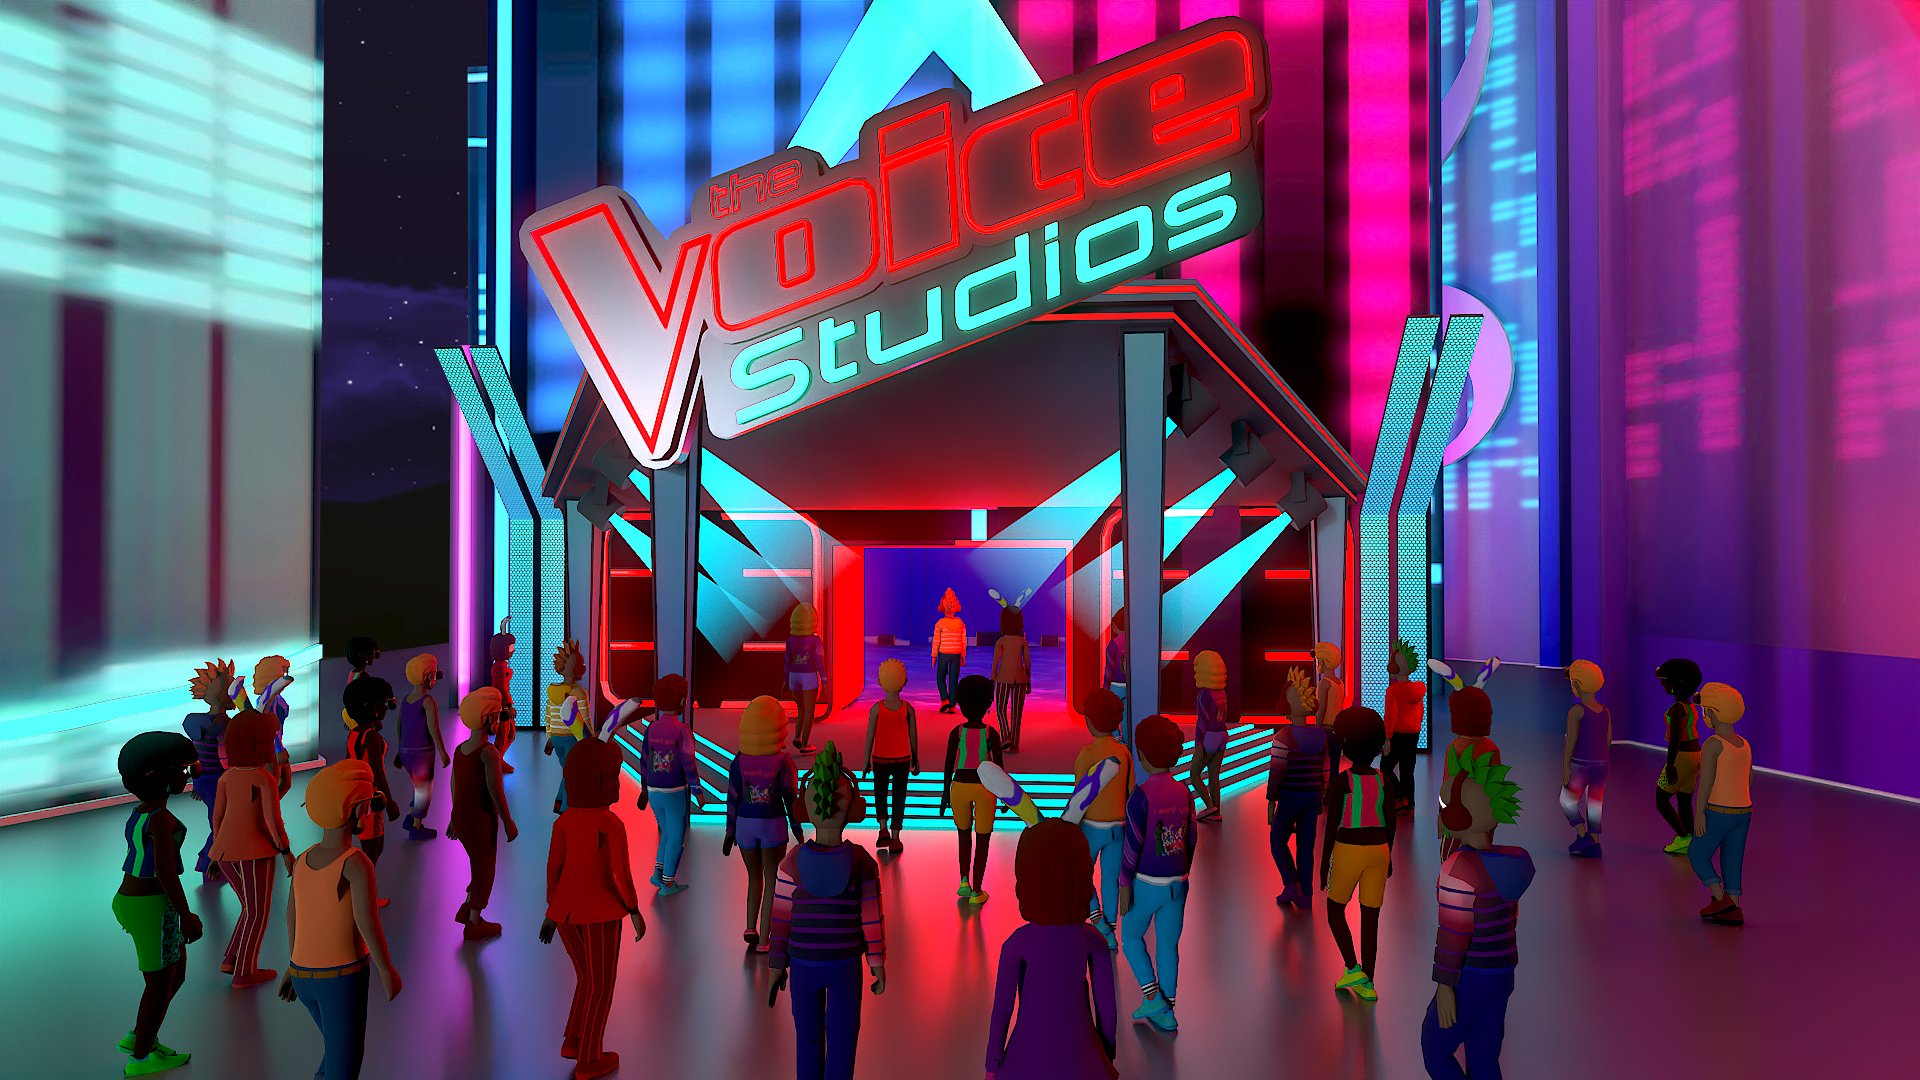 The Voice's new residence in the metaverse will allow fans meet up with celebrities, enjoy games and win prizes